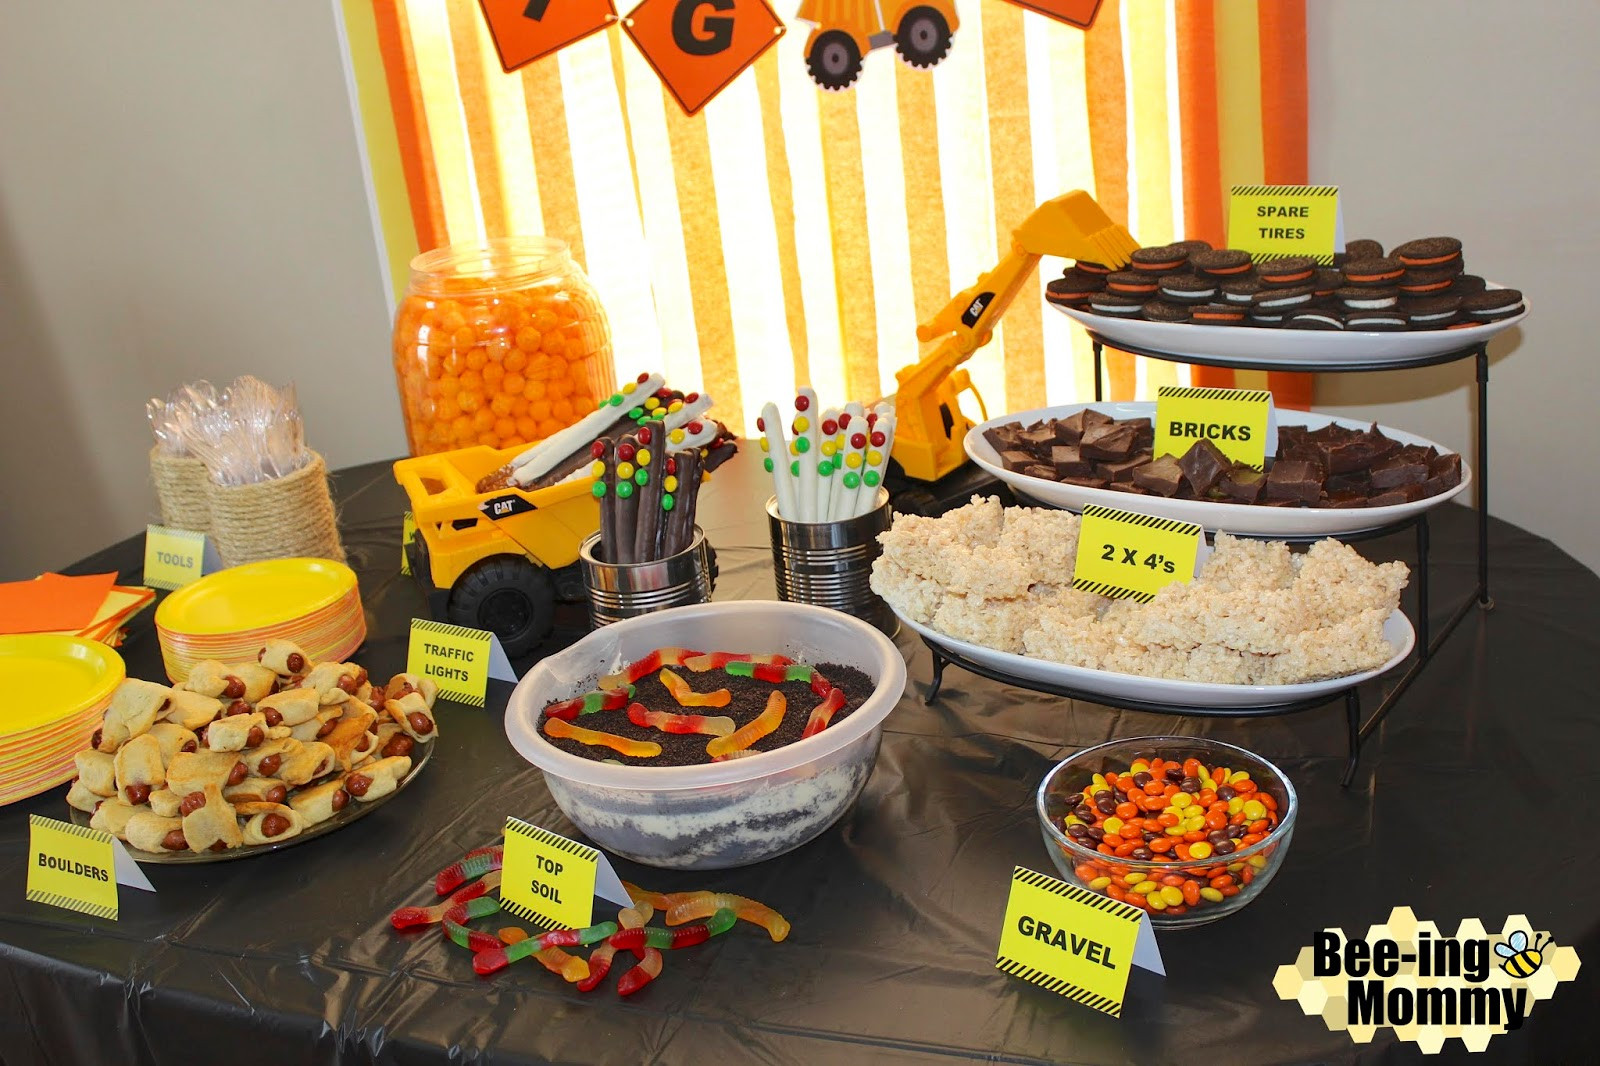 Construction Party Food Ideas
 Construction Birthday Party